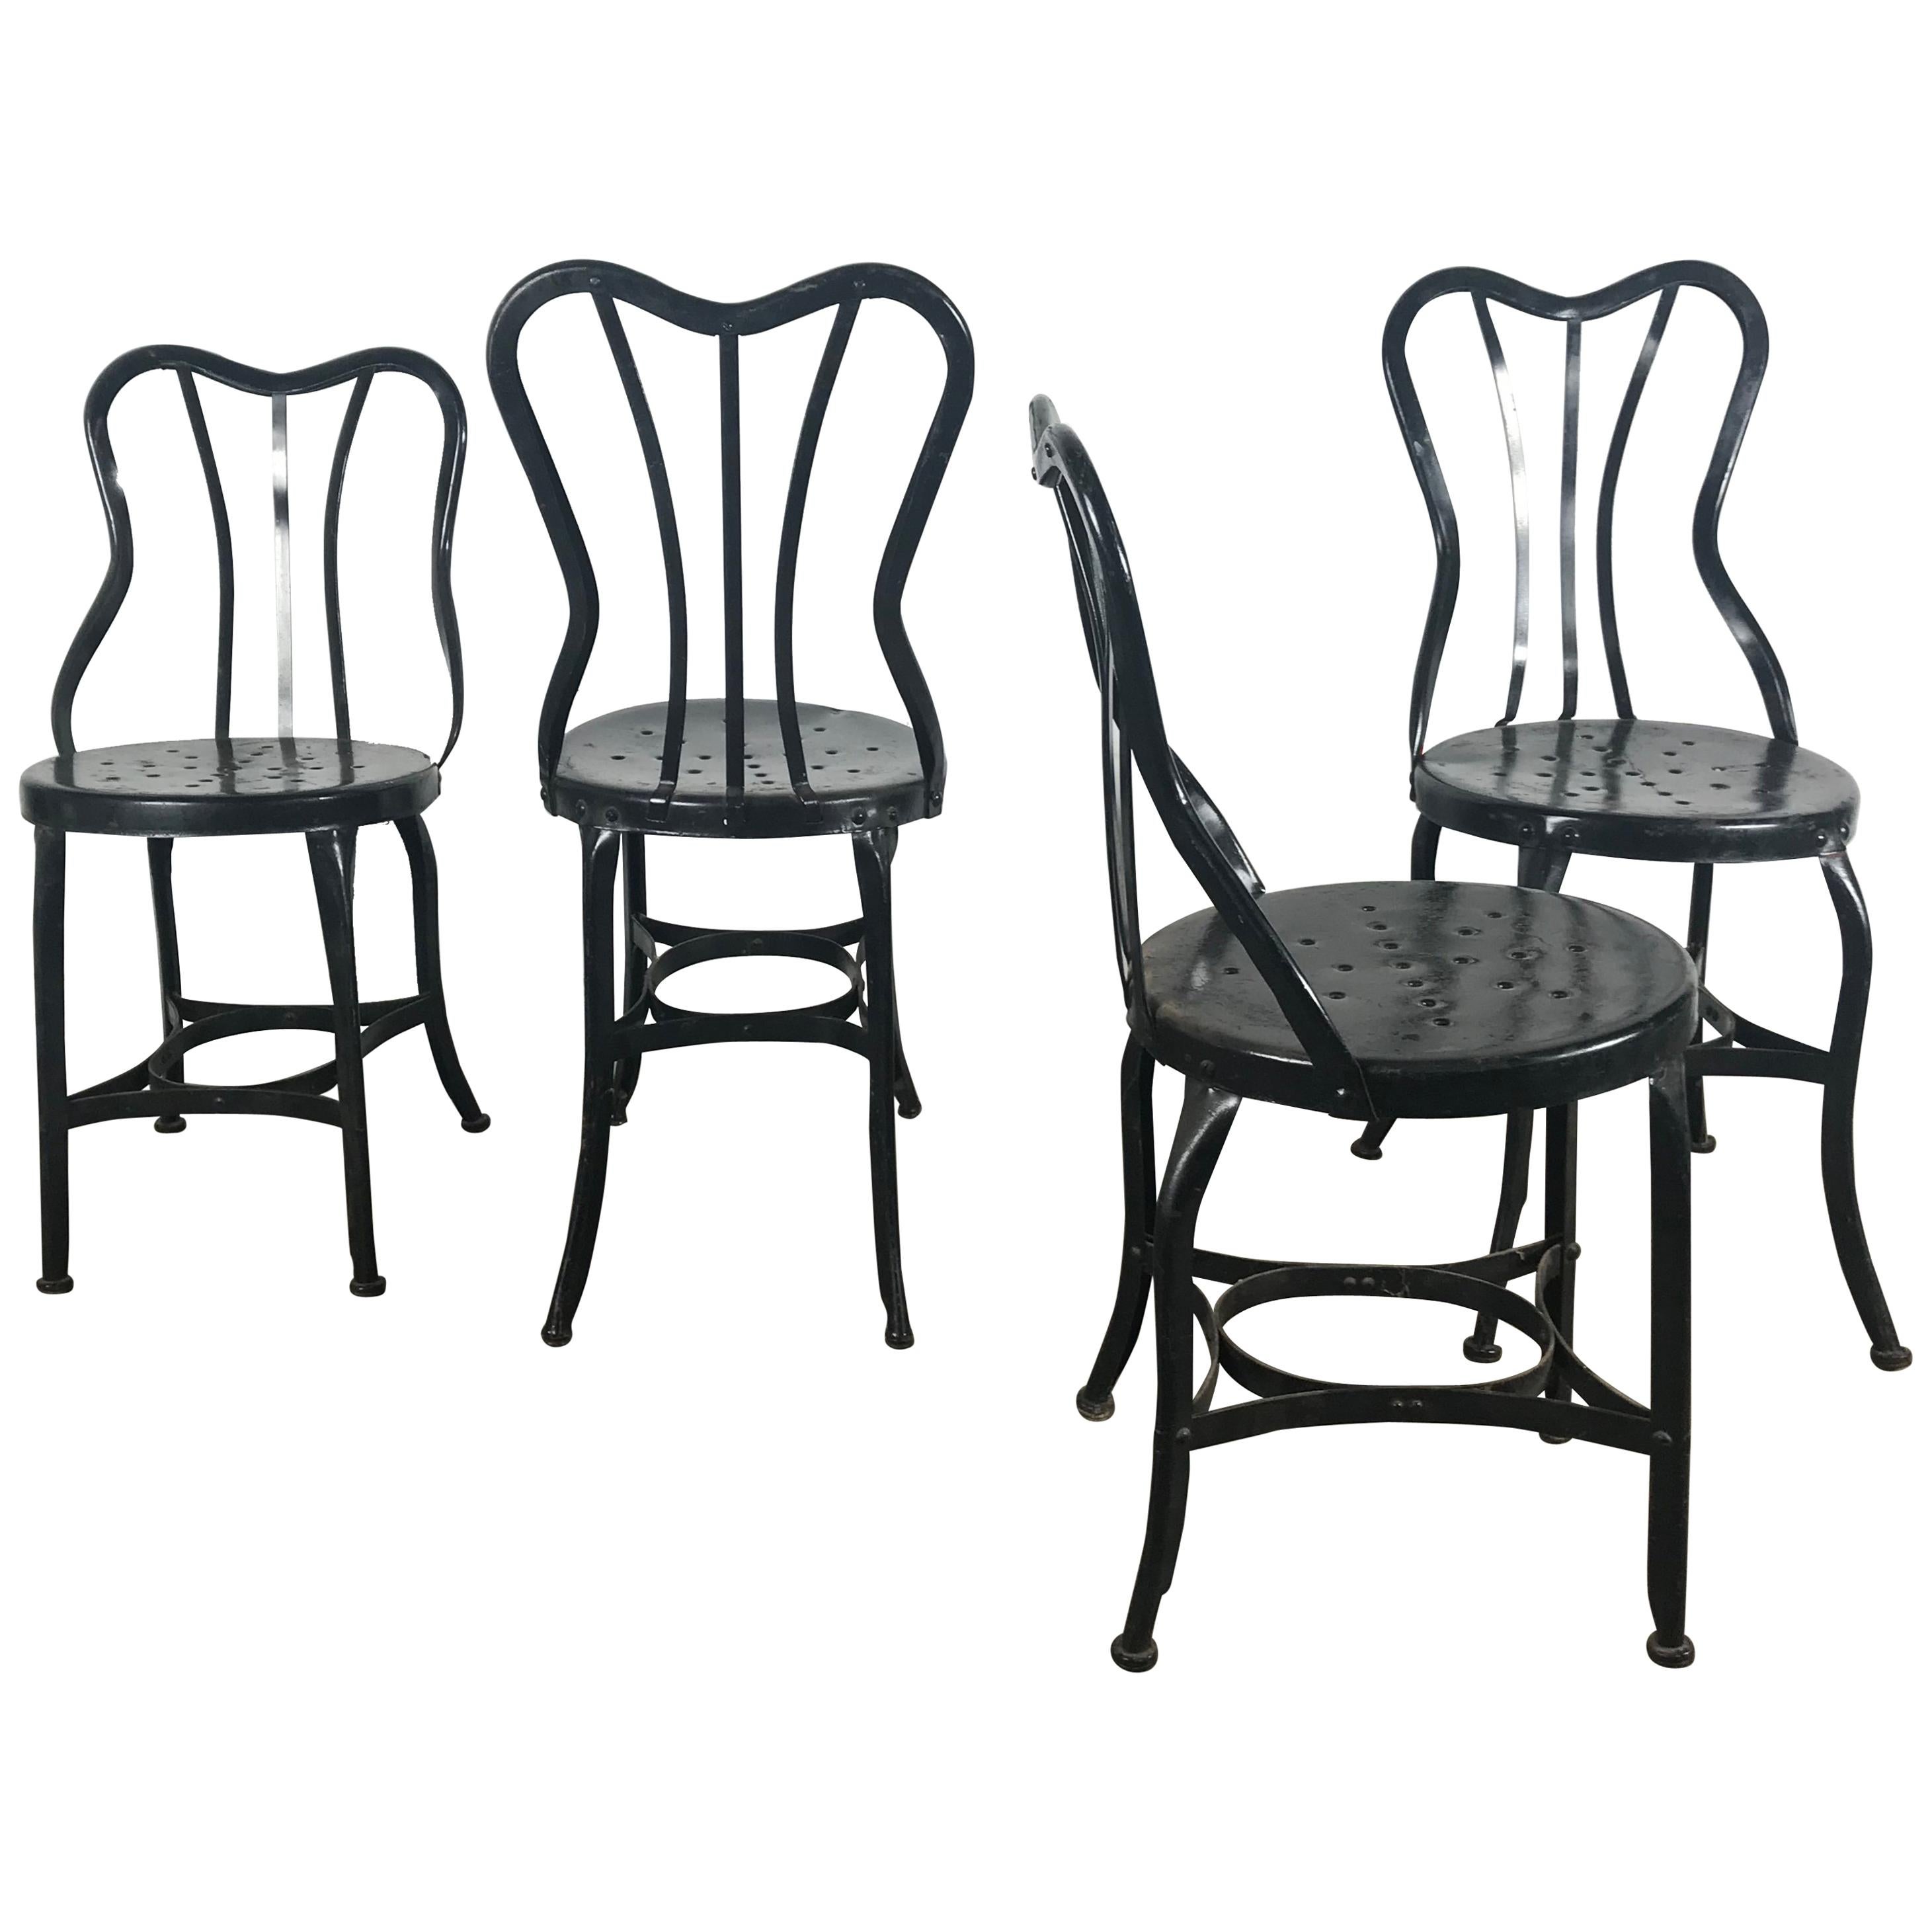 Set of 4 Classic Industrial Metal Side Chairs by Ohio Steel For Sale